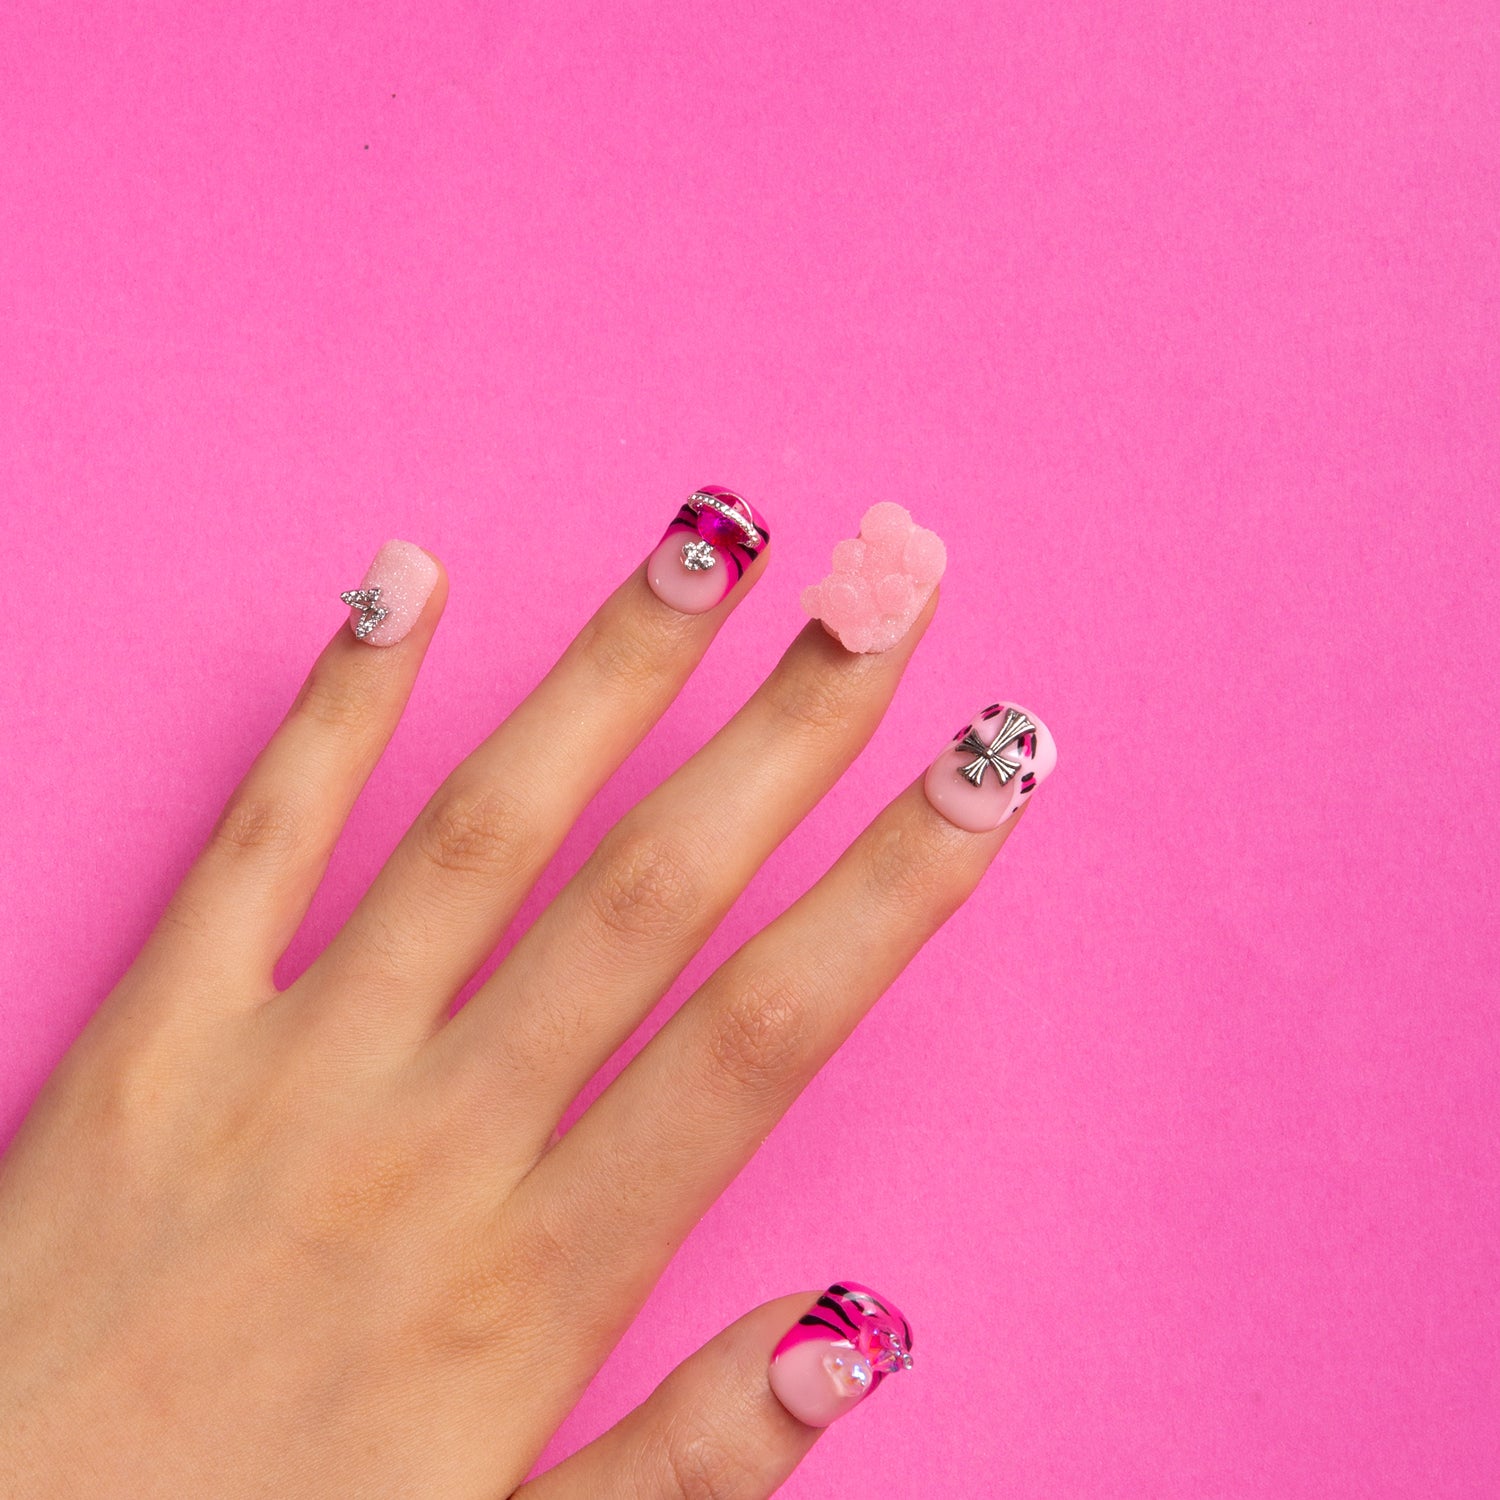 Hand with Safari Love press-on nails featuring hot pink French tips, leopard prints, lips, butterflies, and charming accents against a pink background.